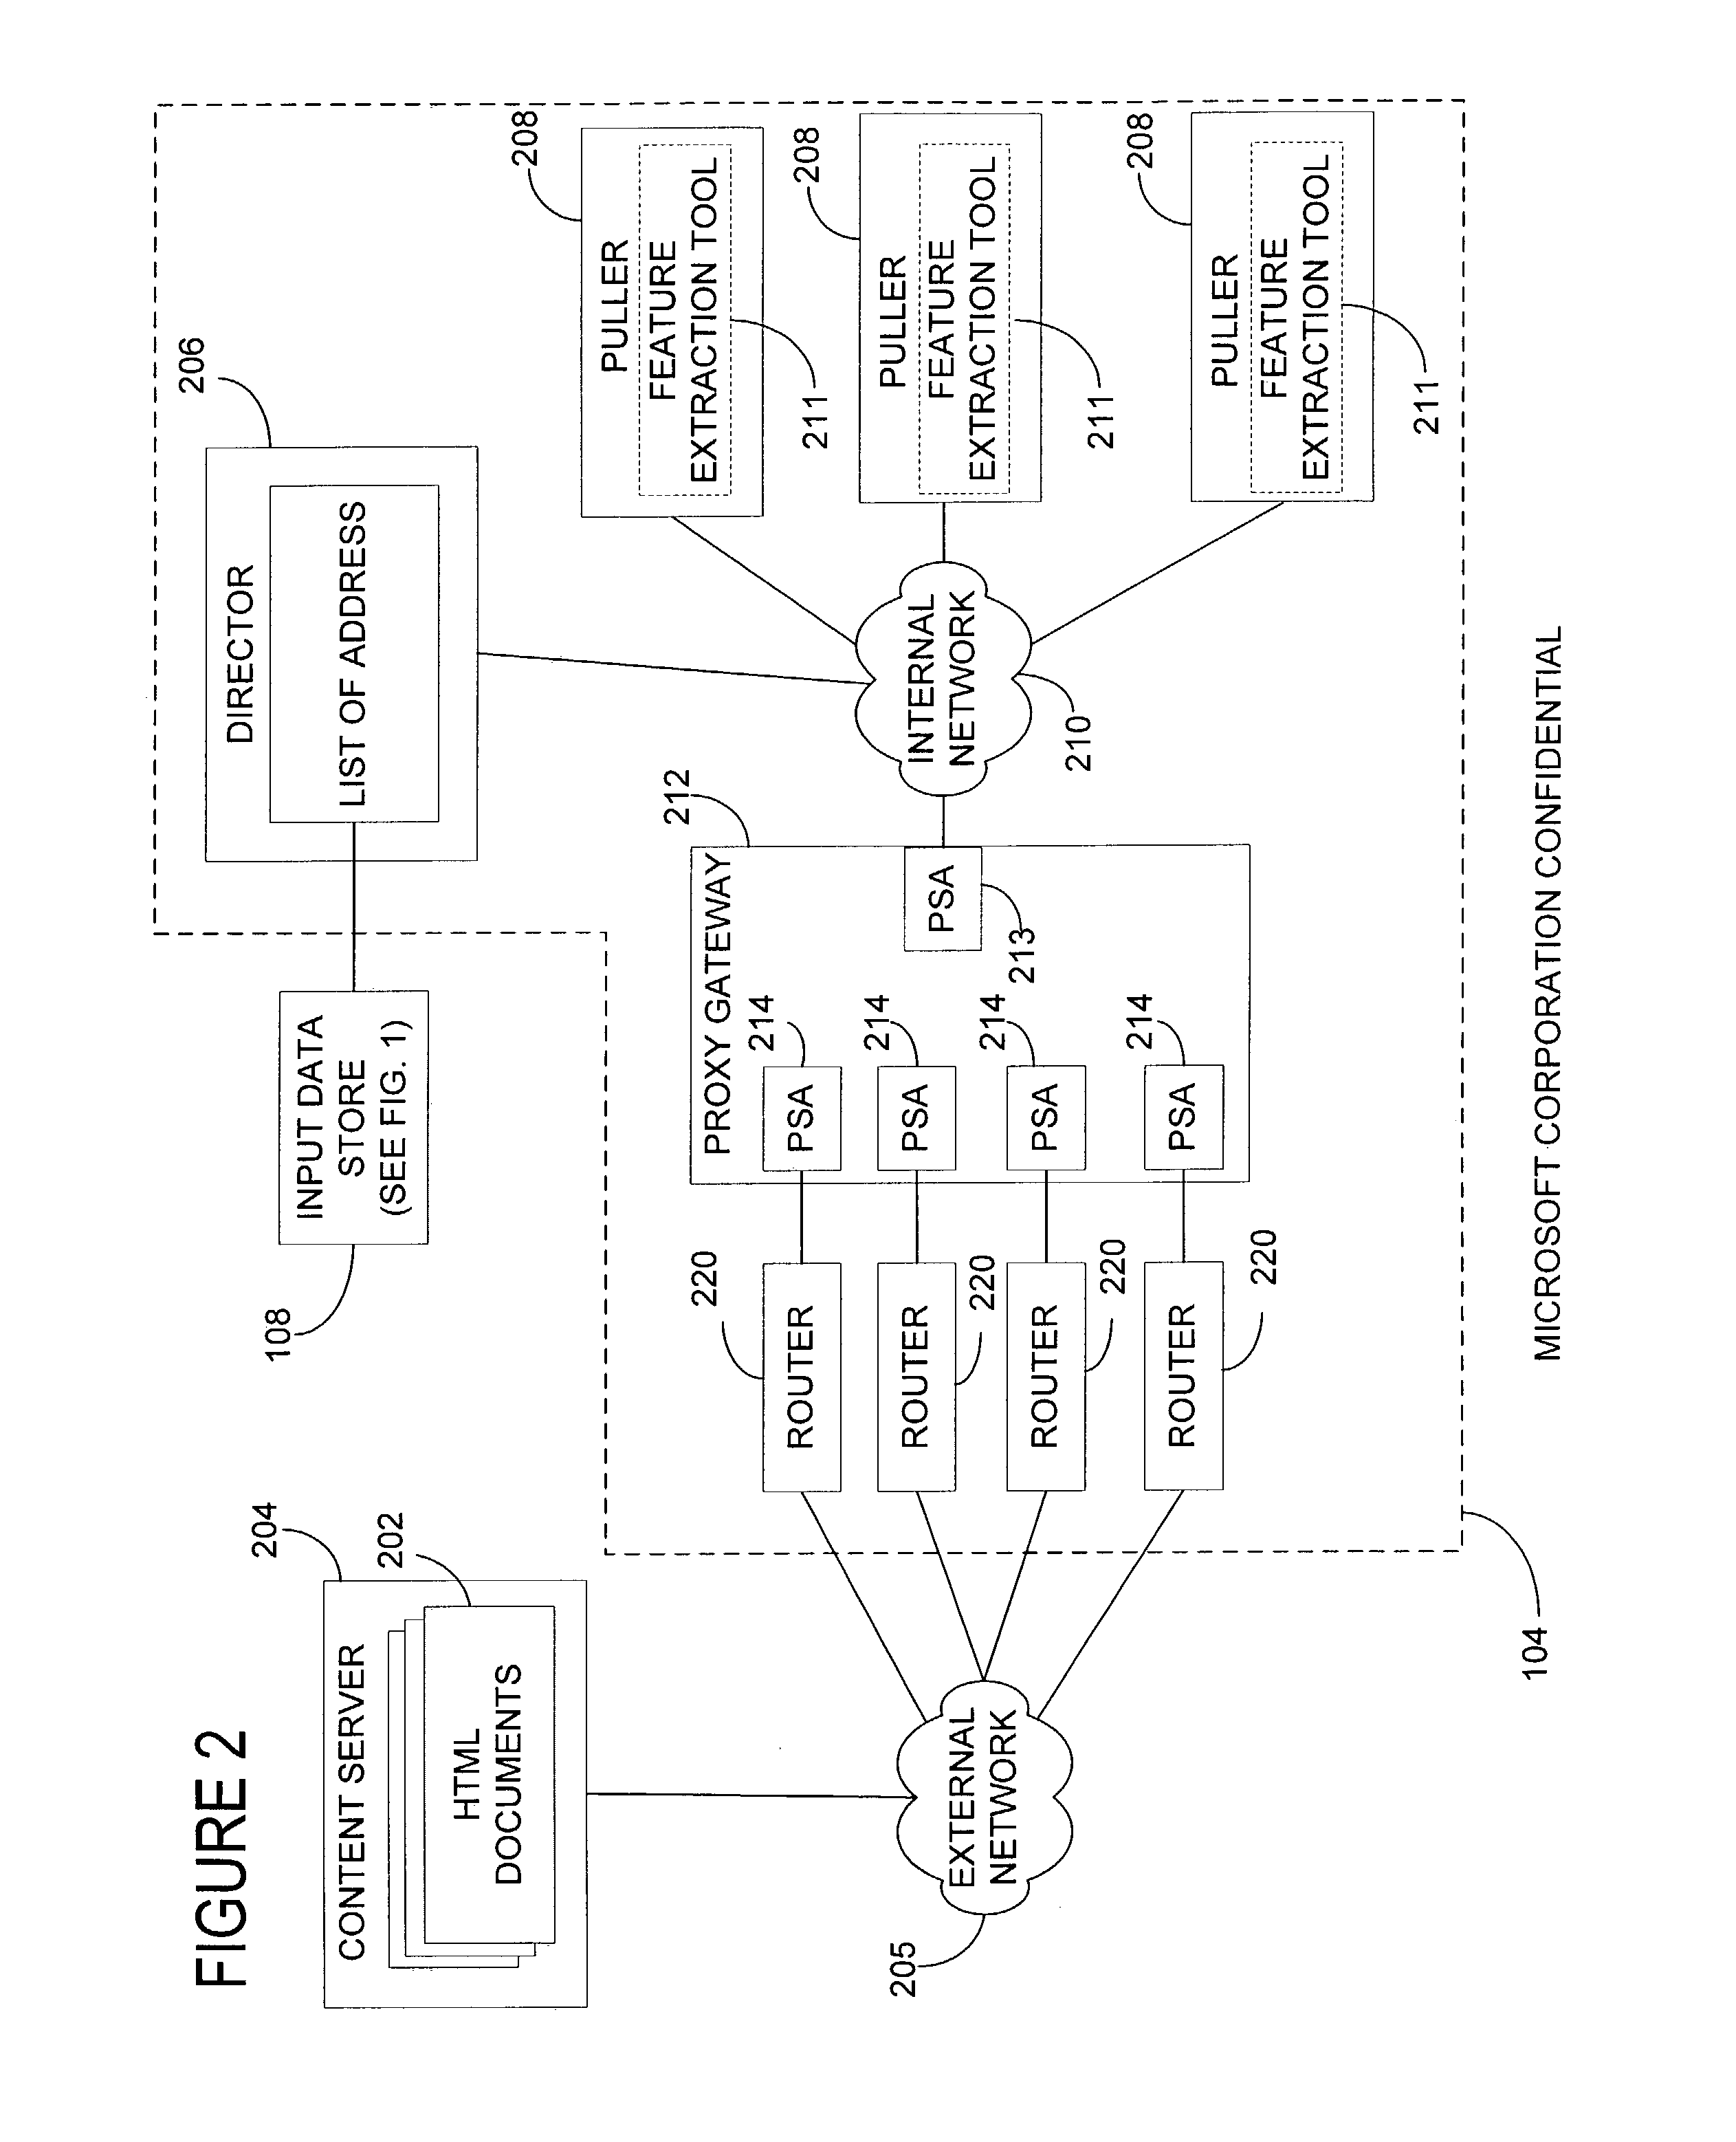 Method for downloading high-volumes of content from the internet without adversely effecting the source of the content or being detected